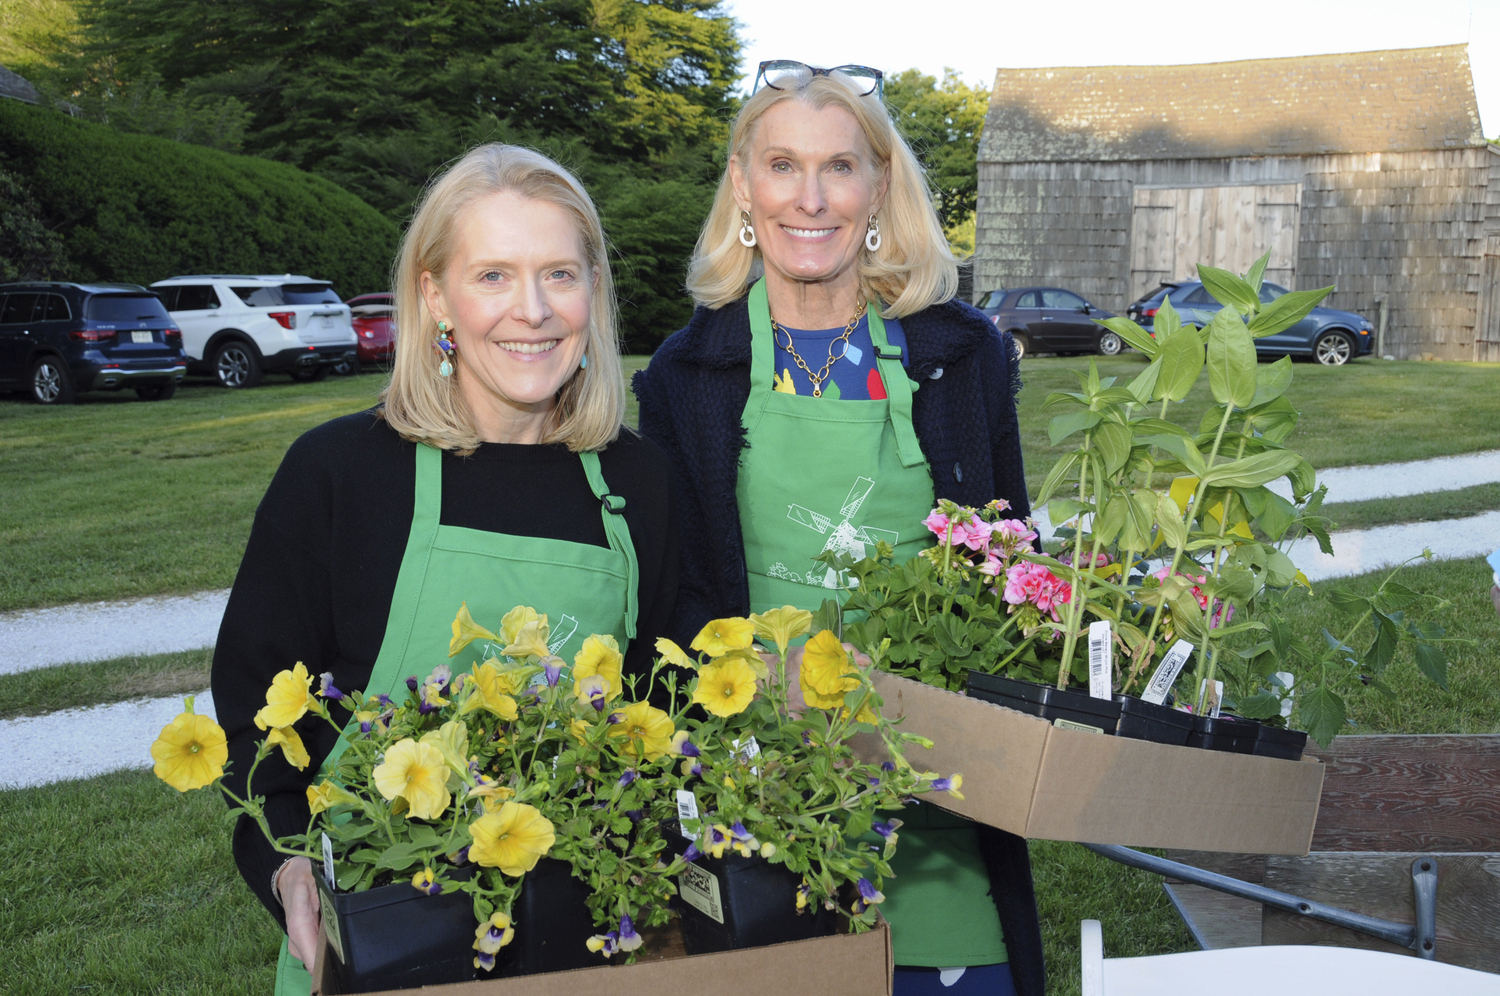 Allegra Kelly and Francie Murphy at the Garden Club of East Hampton's annual garden party and plant sale on the grounds of Mulford Farm in East Hampton on Friday evening. Plant lovers took home armloads and Flexible Flyers full of their favorites and bid for silent auction items. A special 